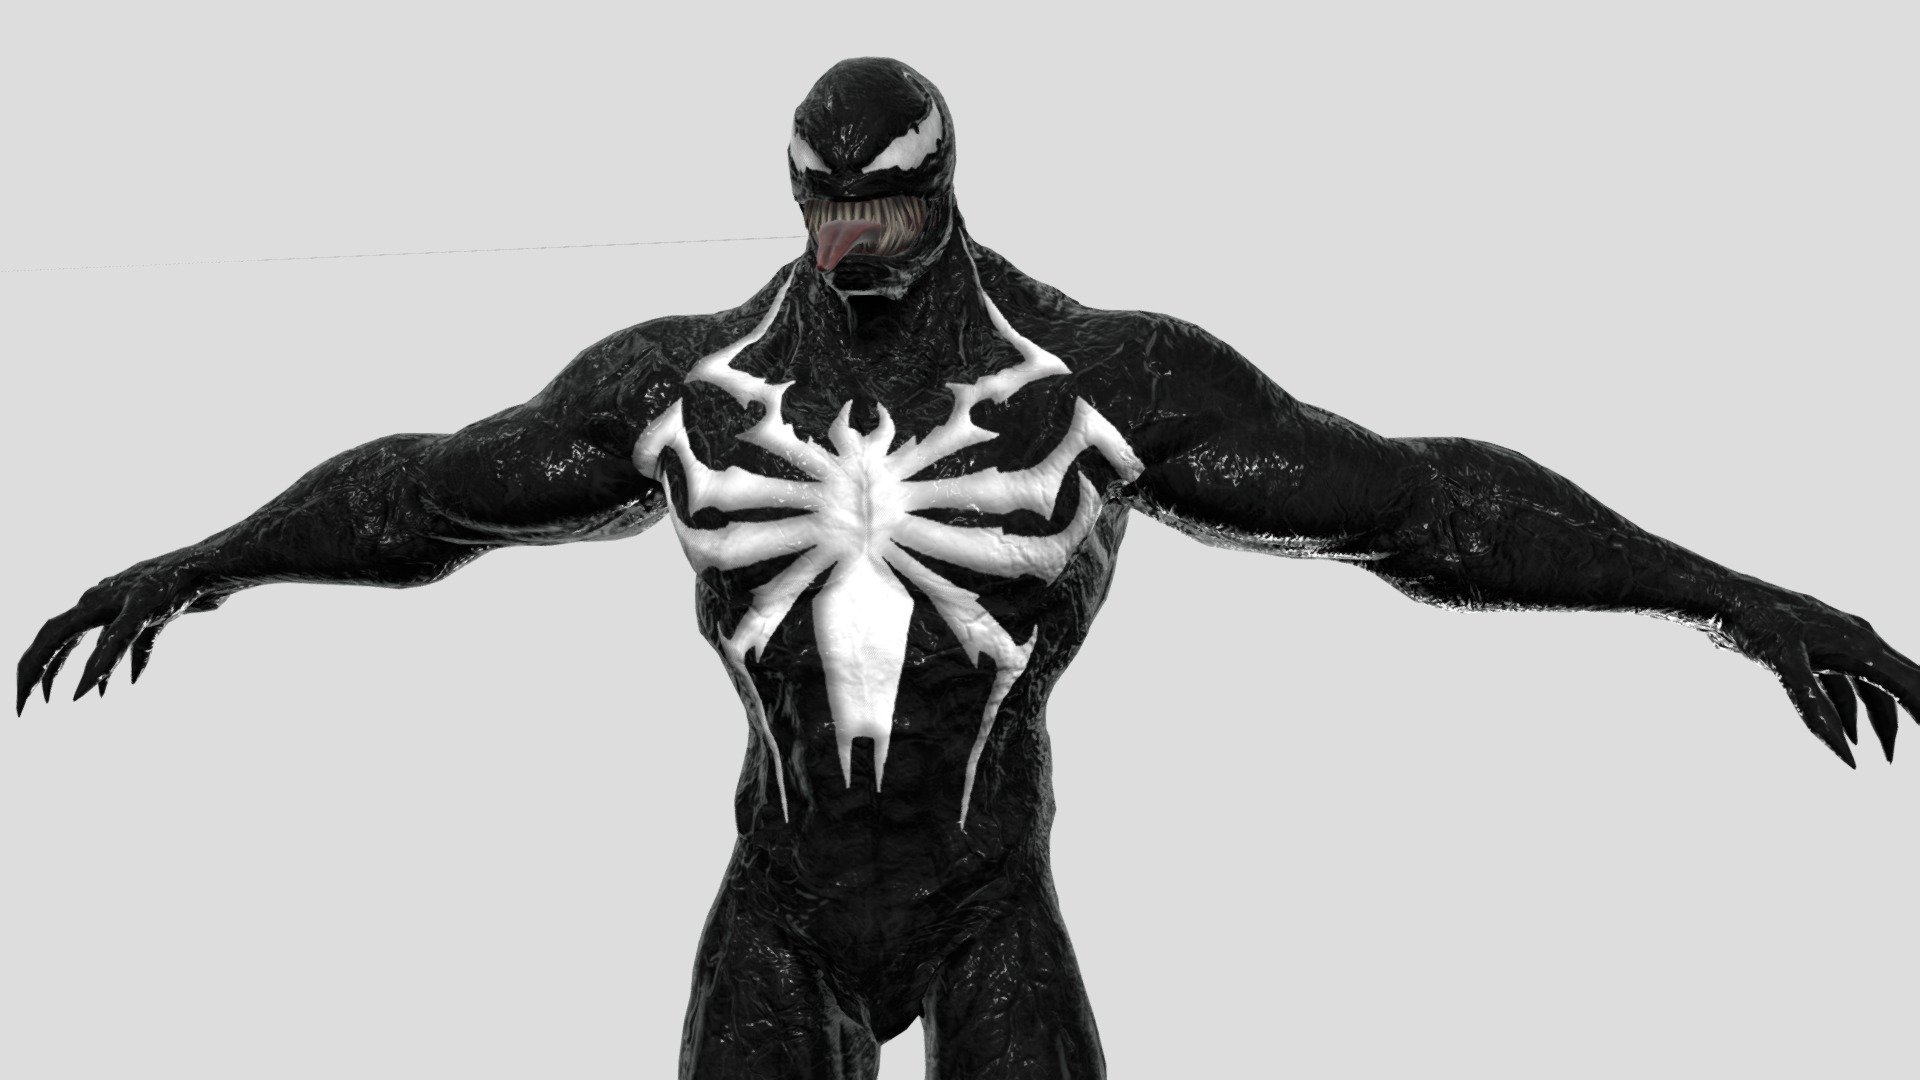 3D model based on the latest version of Venom. 

Venom, codenamed VNM-252, is a character in the Marvel's Spider-Man video game series, serving as an antagonist in Marvel's Spider-Man 2.
It is an alien symbiote that bonds with human bodies to use as hosts. The symbiote briefly appears in the endings of both the first game and Miles Morales, where Harry Osborn was confirmed to be its host. After temporarily leaving Harry to bond with Peter Parker, it eventually returns to Harry, becoming Venom.

Youtube Channel: https://www.youtube.com/channel/UCL8v9oegKmFf4l8G8ZvActA - Marvel's Spider-Man 2 - Venom - (Rigged) - Download Free 3D model by herohunter pictures (@herohunterpictures) 3d model